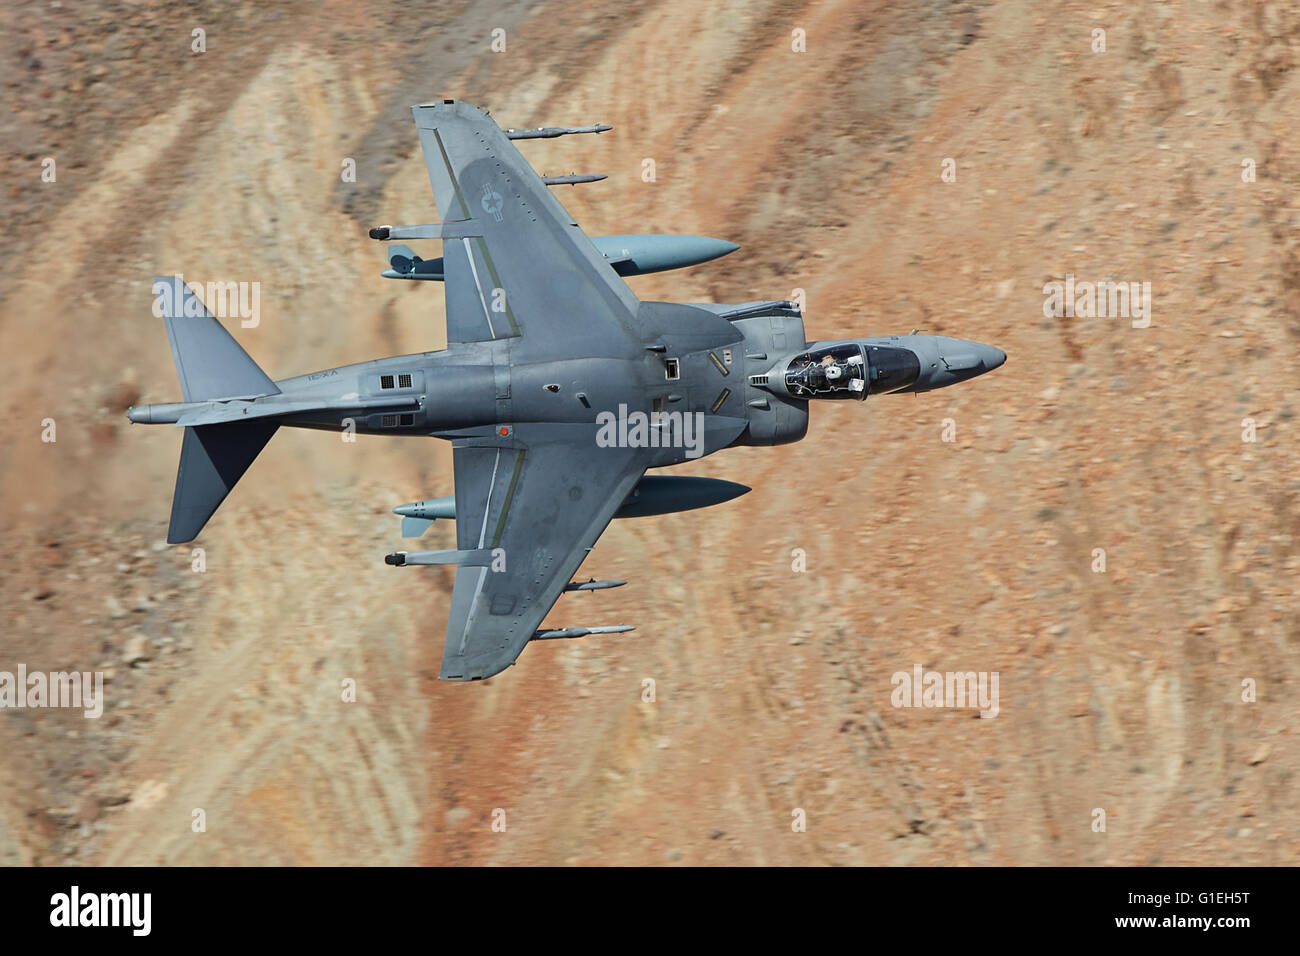 United States Marine Corps AV-8B Harrier II V/STOL Ground Attack Jet Flying At Low Level And High Speed Through A Desert Canyon In California, USA. Stock Photo